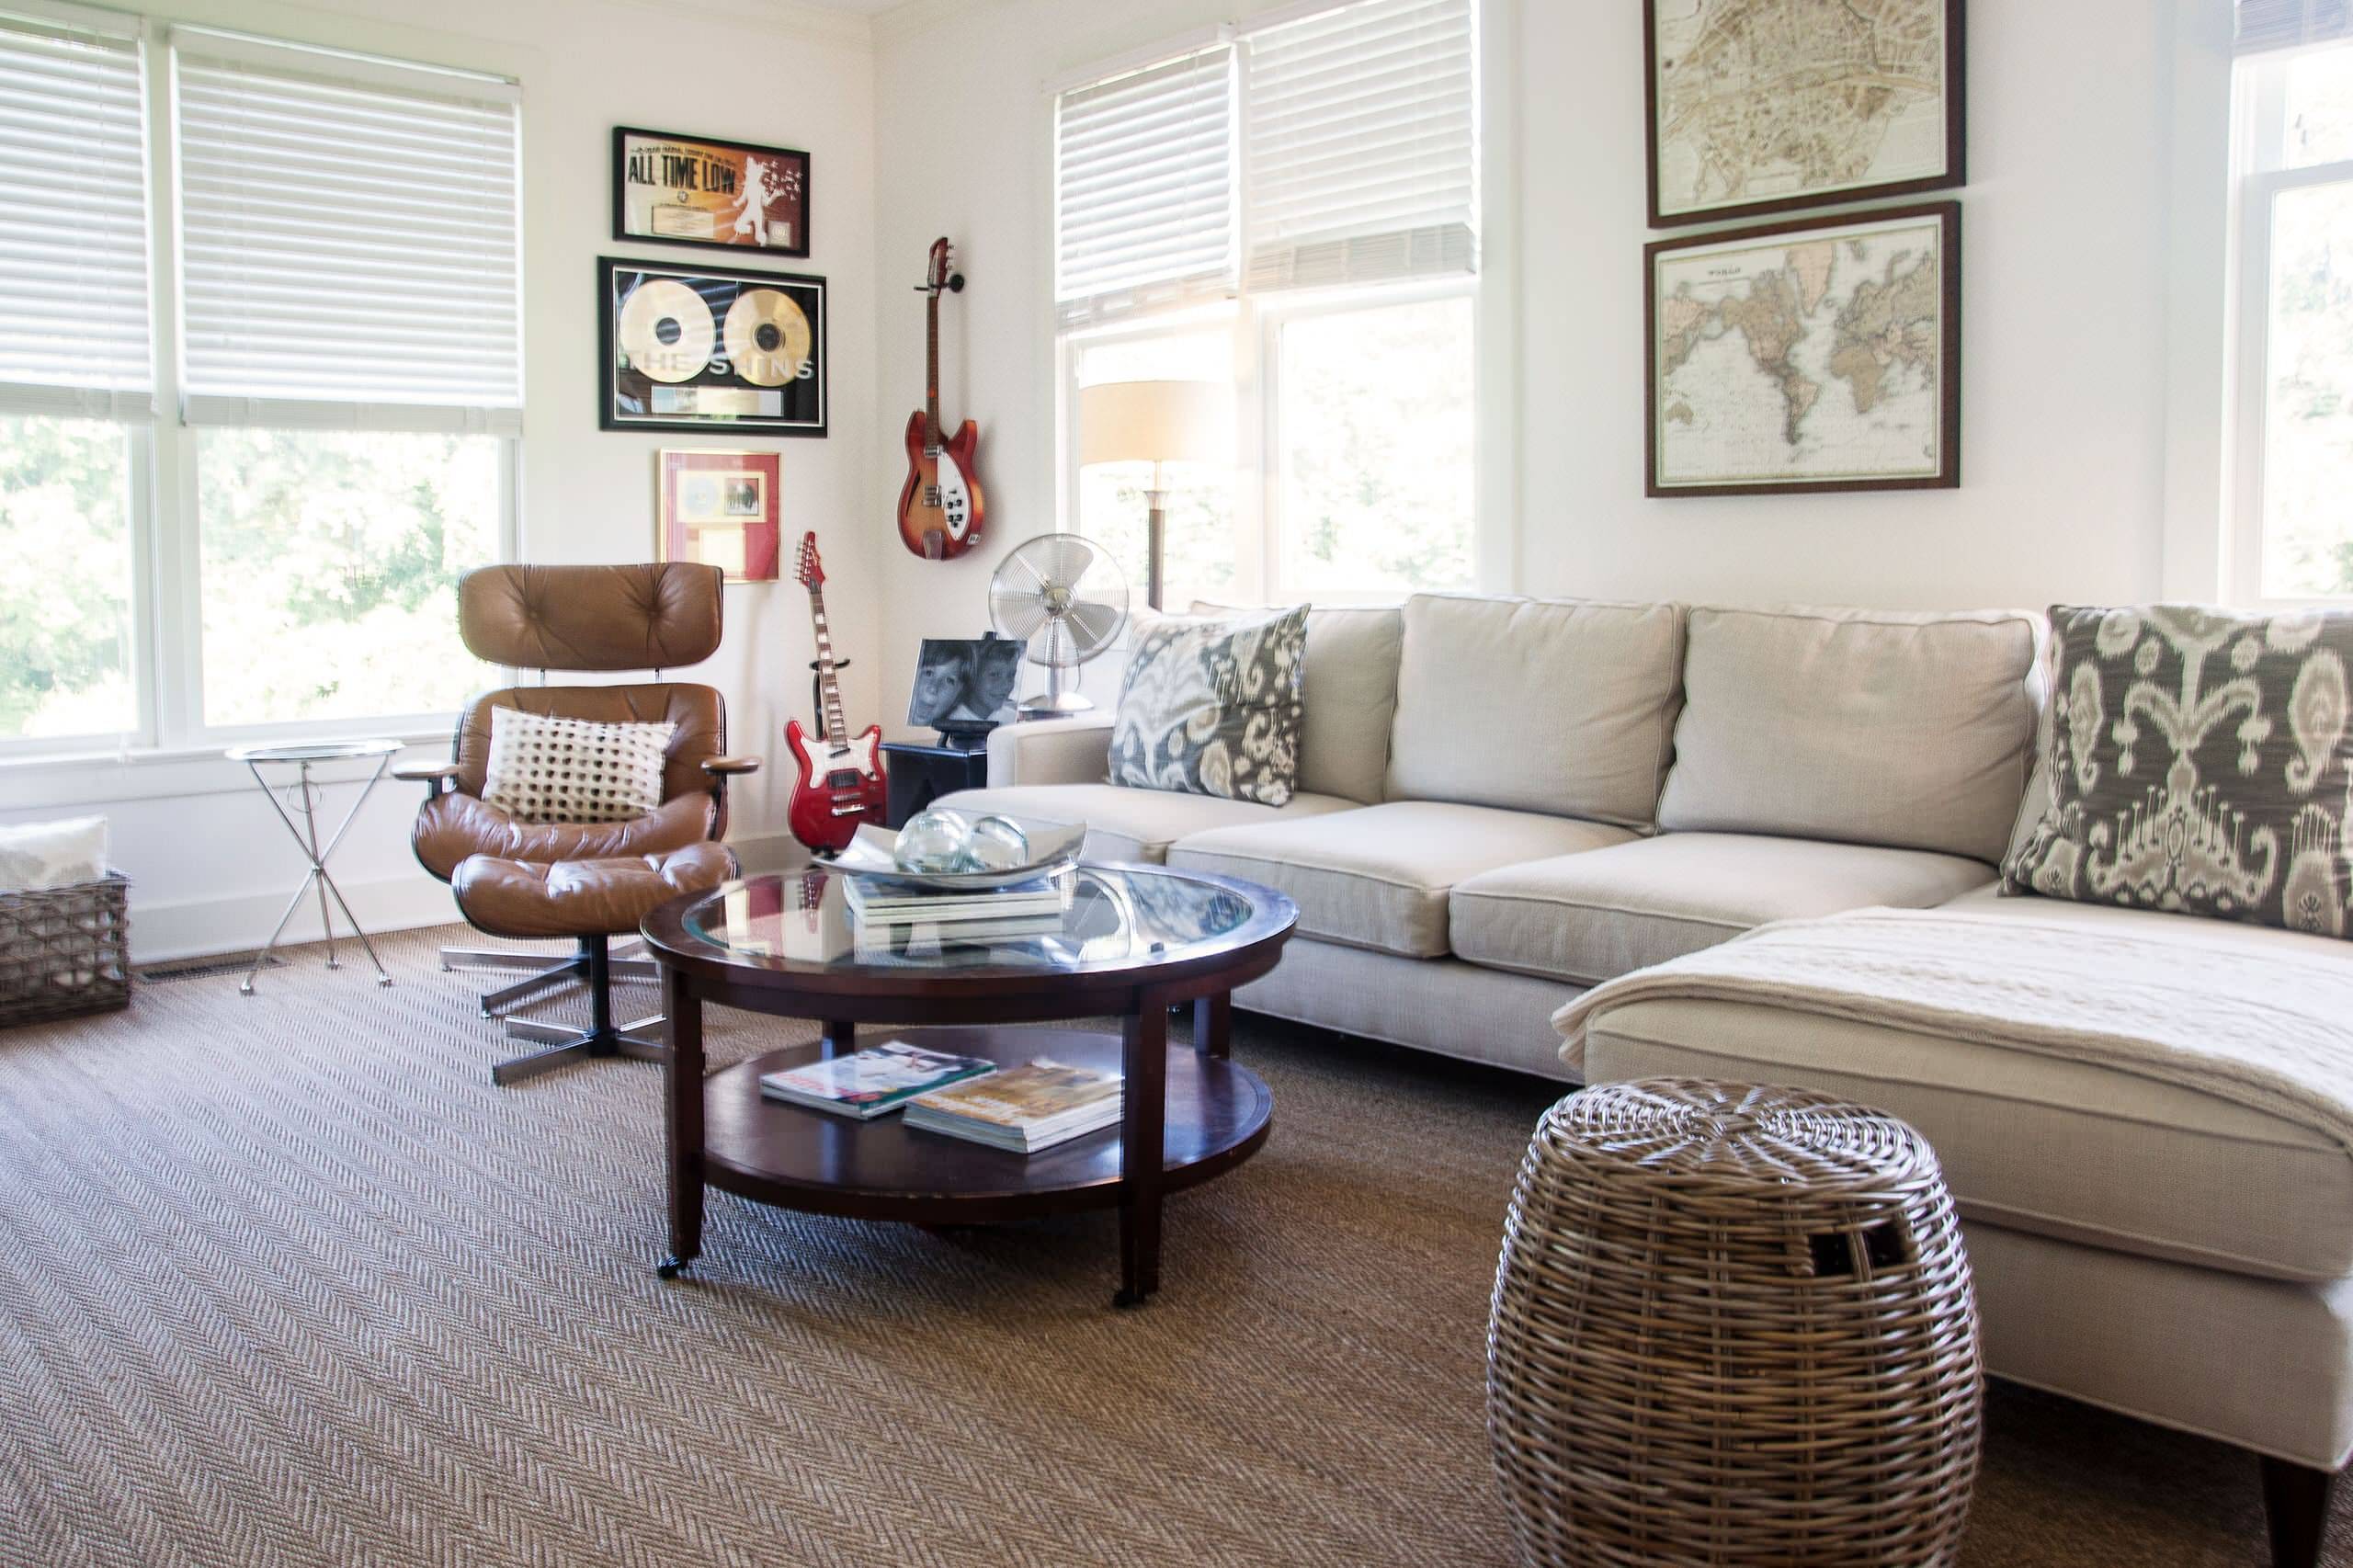 Combination of modern and country elements (from Houzz)